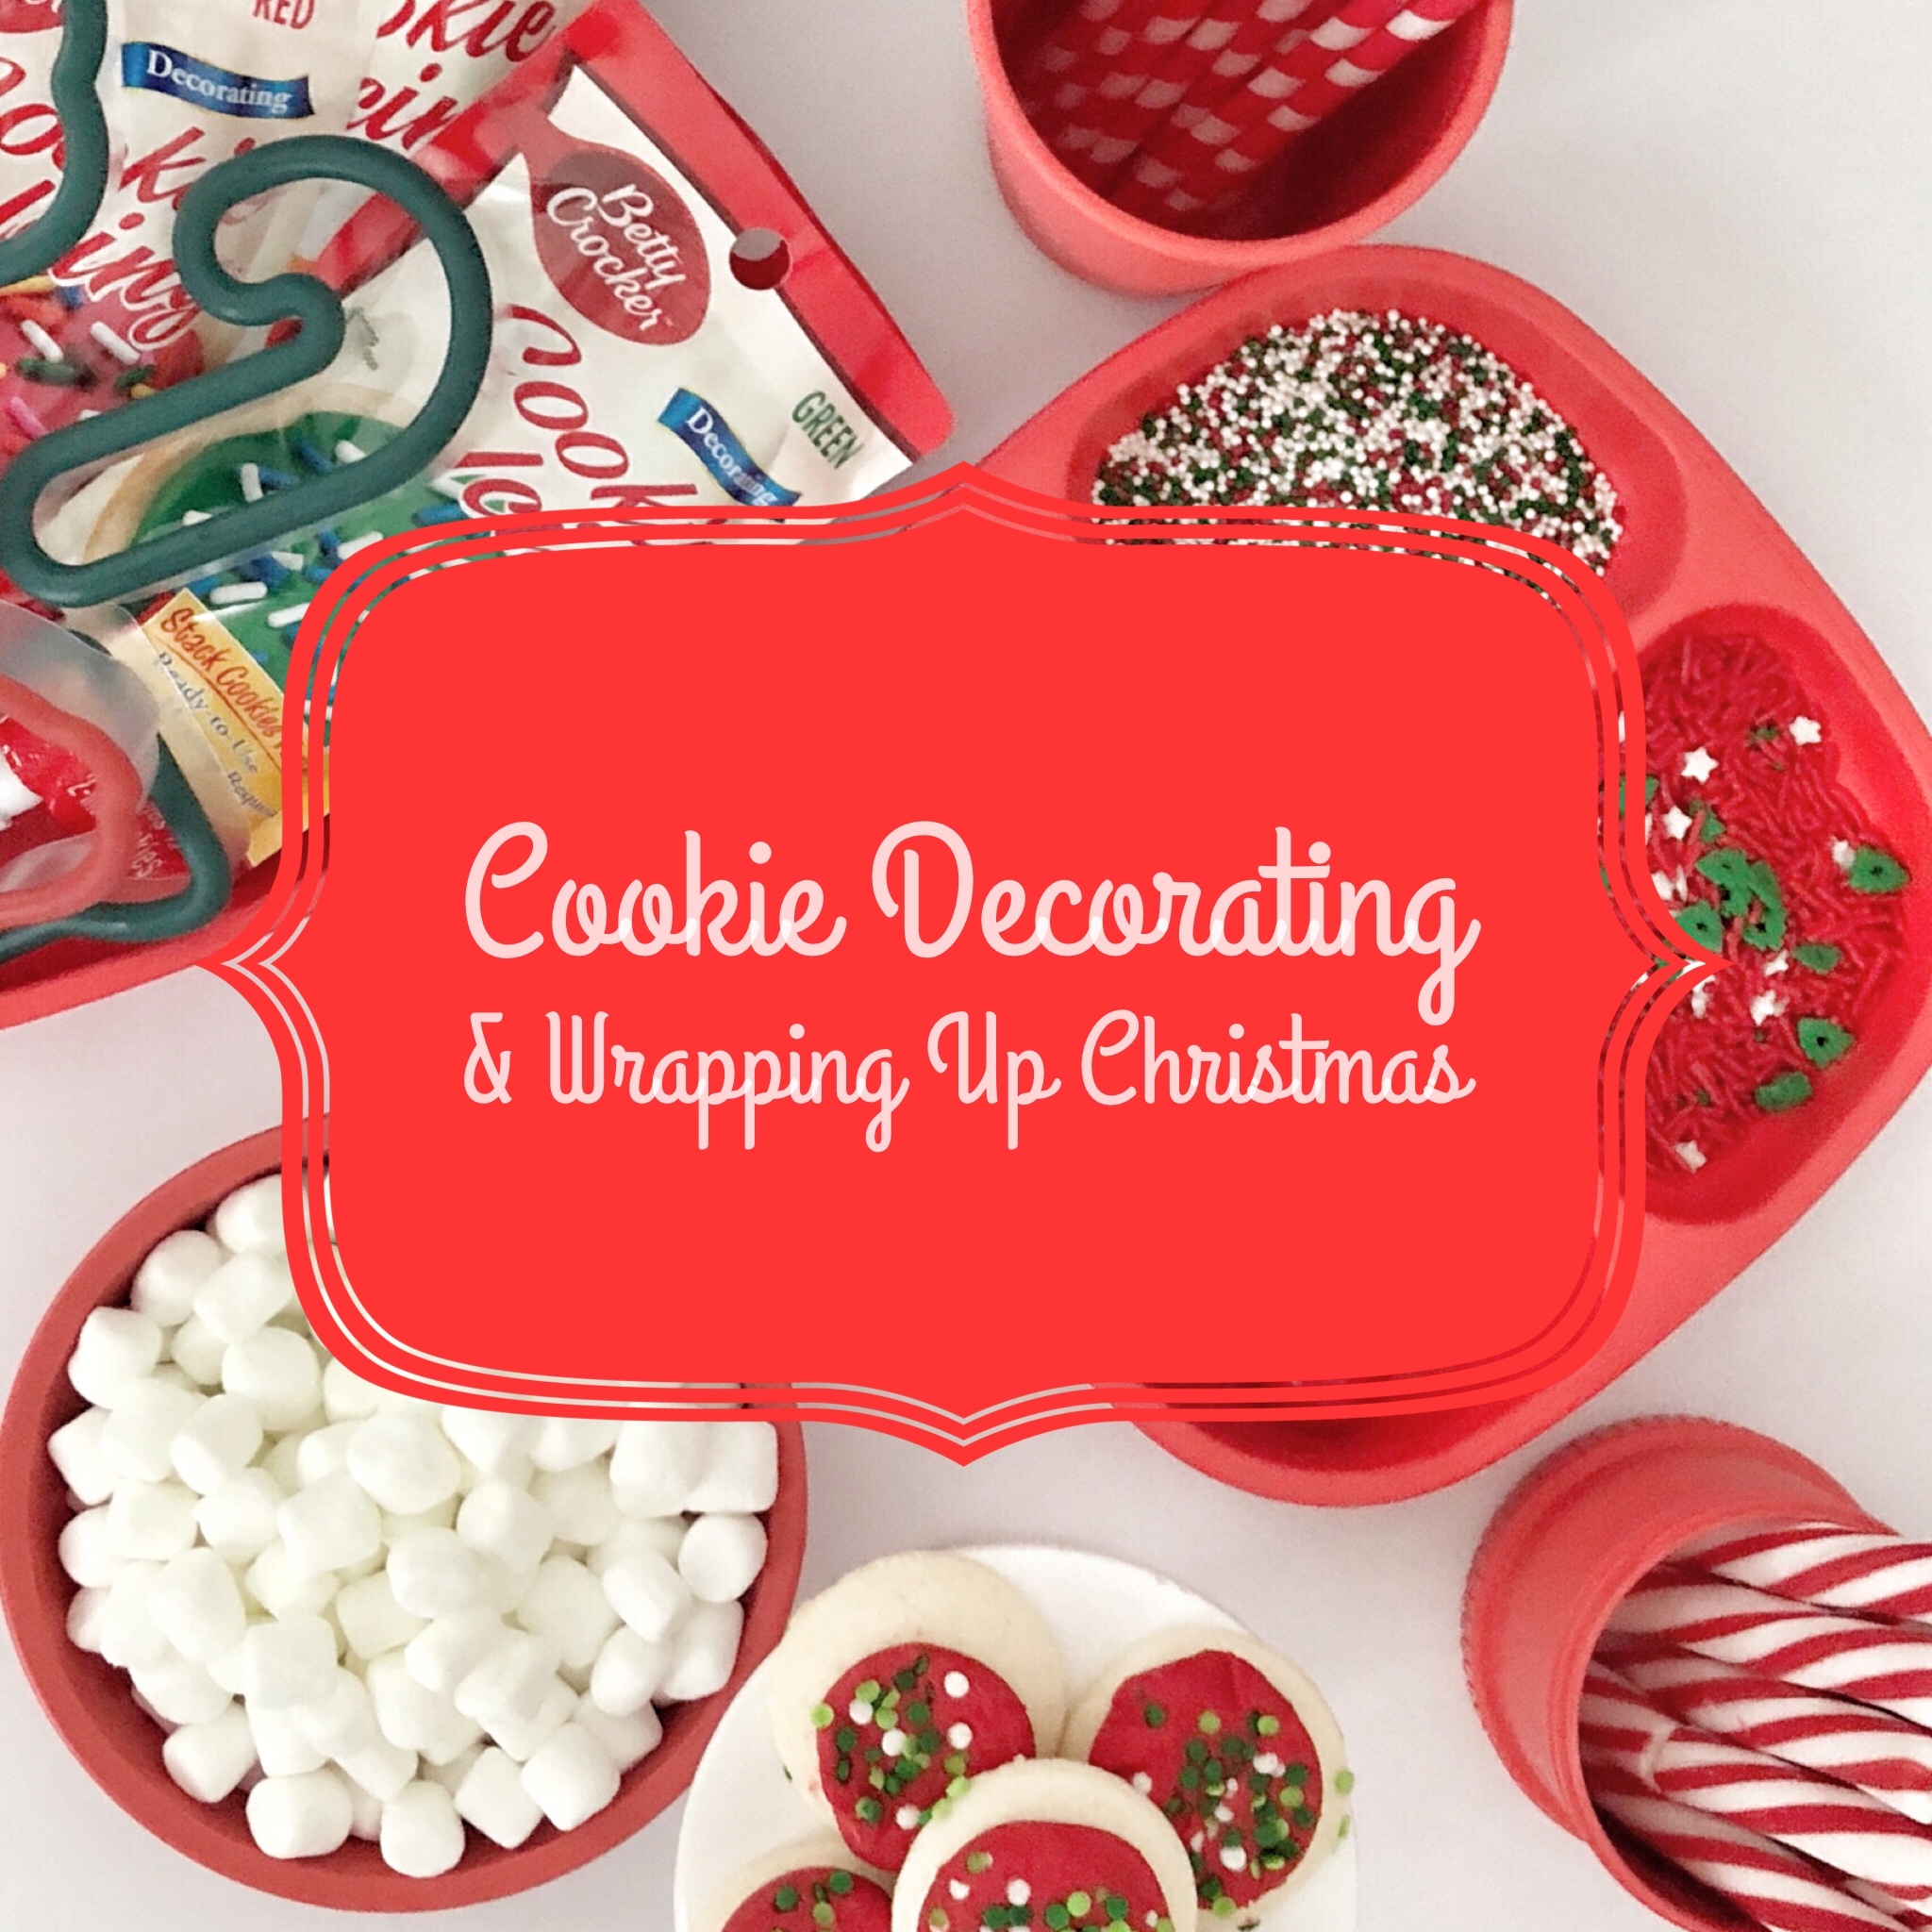 Cookie Decorating & Wrapping Up Christmas